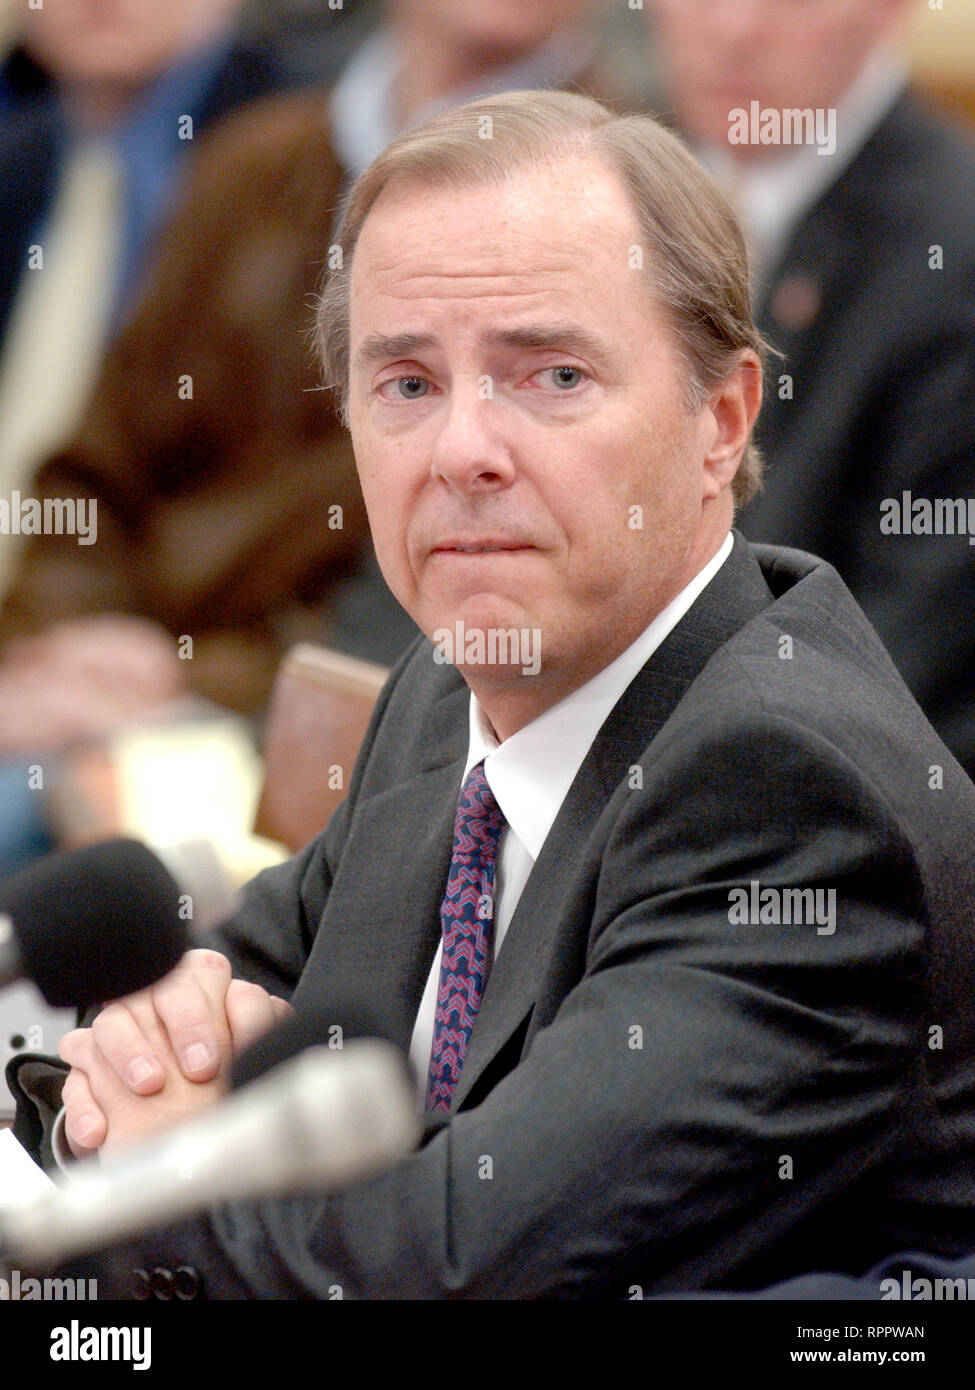 Washington, DC - February 7, 2002 --Jeffrey K. Skilling, former President and CEO; Enron Corporation, nervously awaits his being sworn-in to testify before a hearing of the United States House of Representatives Energy and Commerce Subcommittee on Oversight and Investigations on 'The Financial Collapse of the Enron Corporation'.Credit: Ron Sachs/CNP | usage worldwide Stock Photo